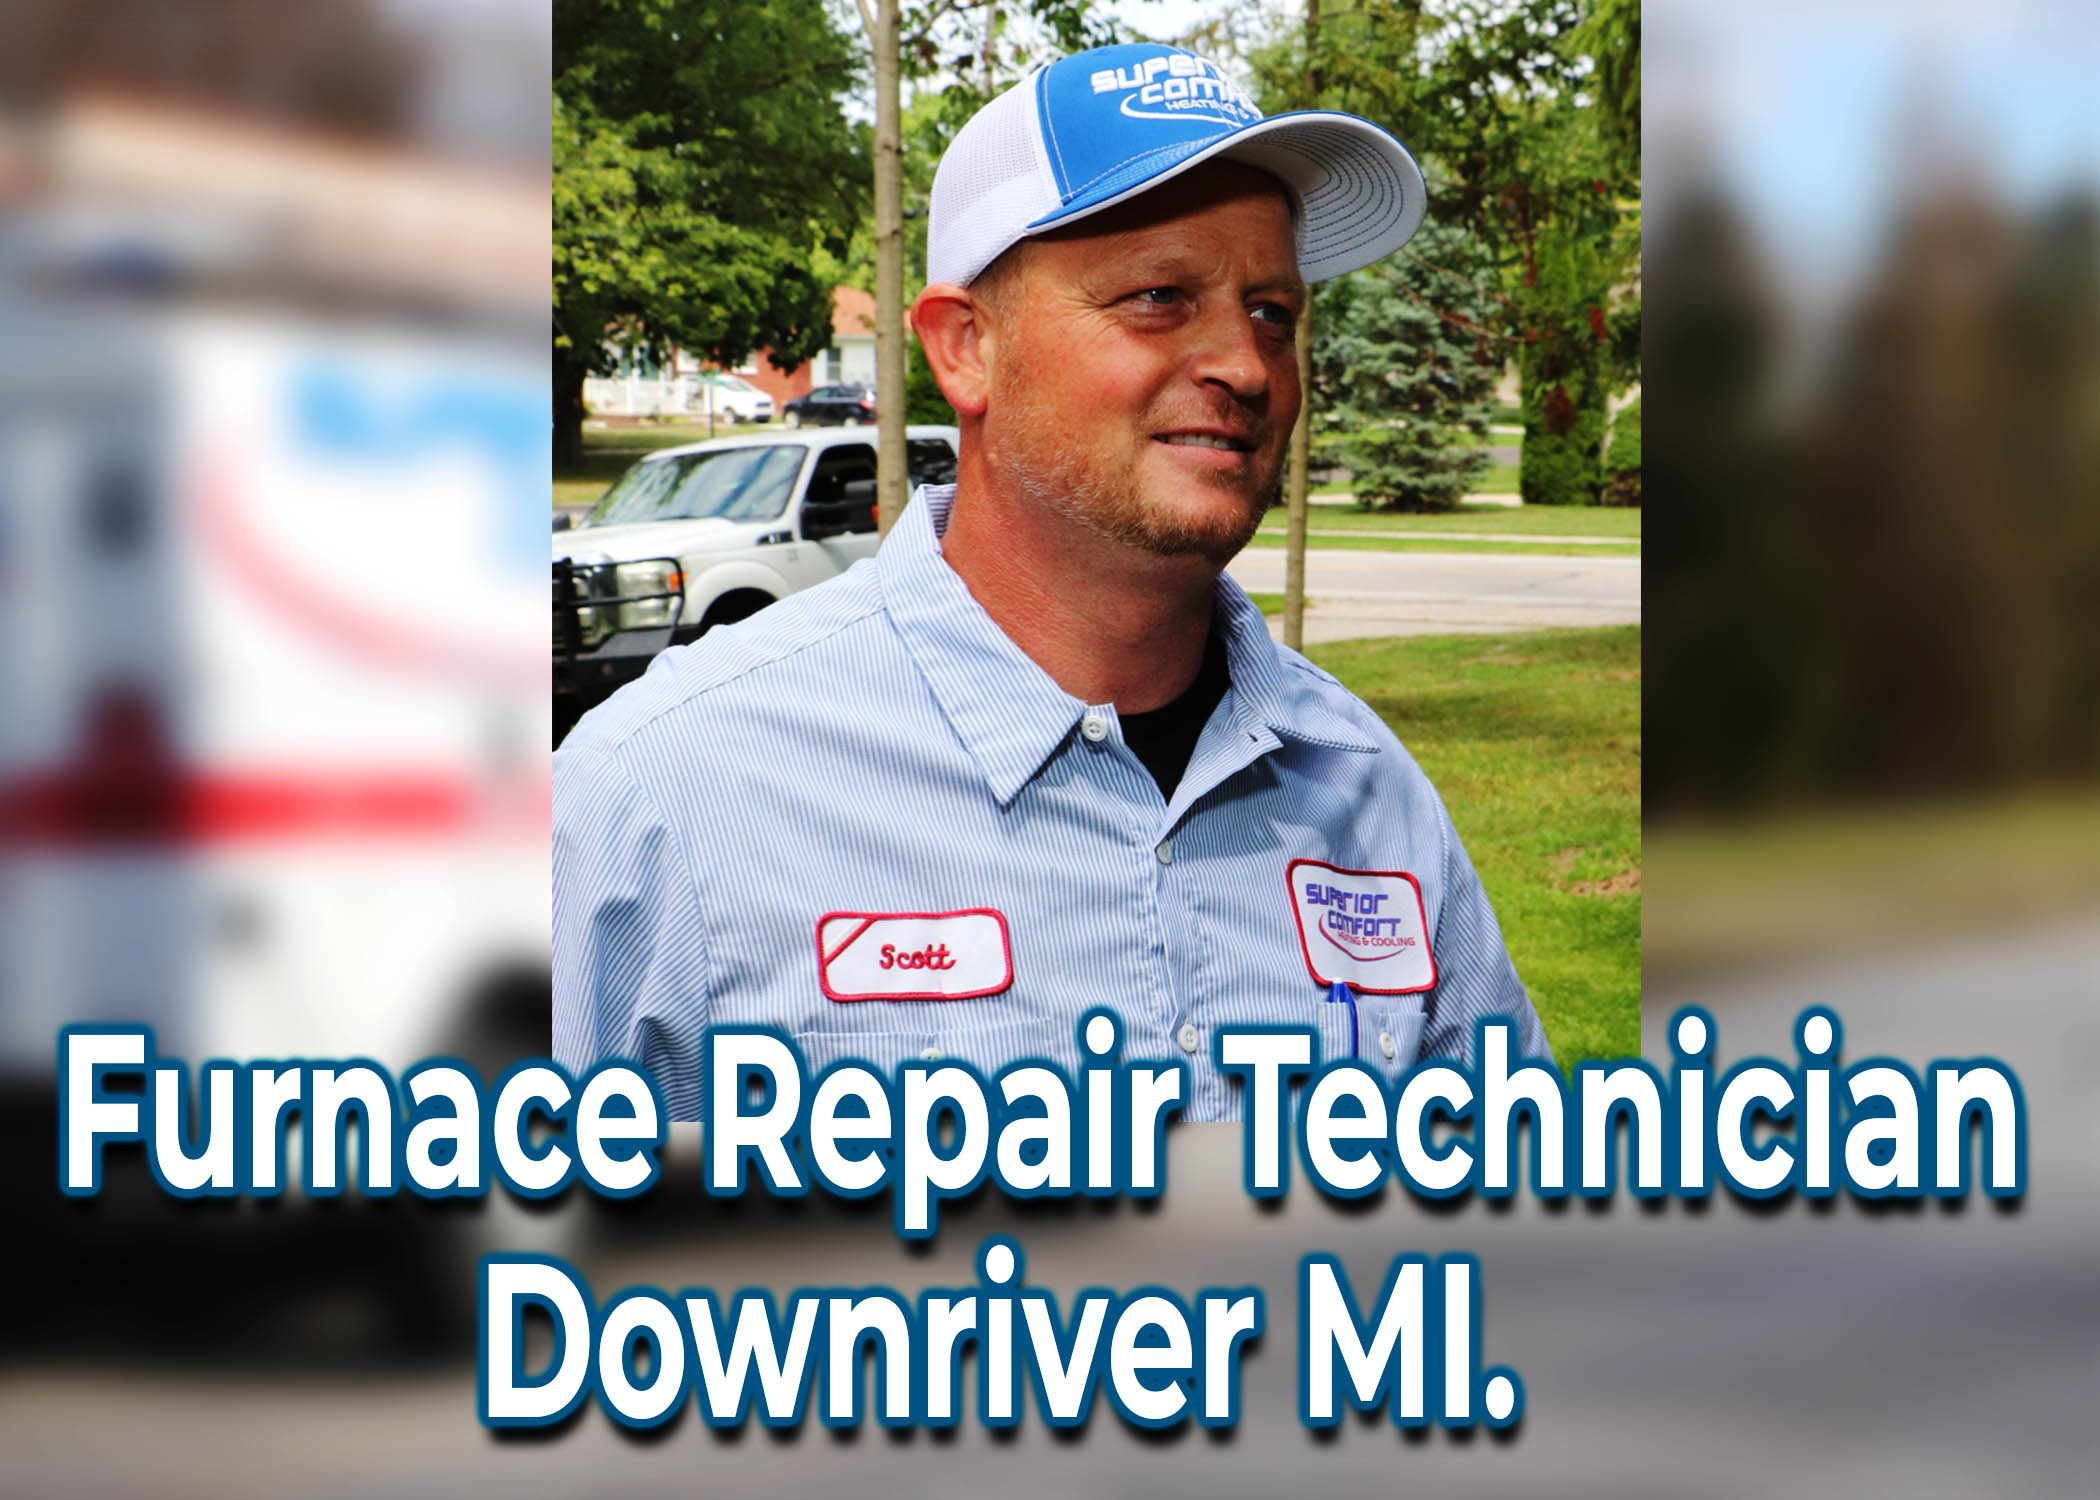 Why Homeowners Should Hire Licensed Furnace Repair Technician Downriver MI.